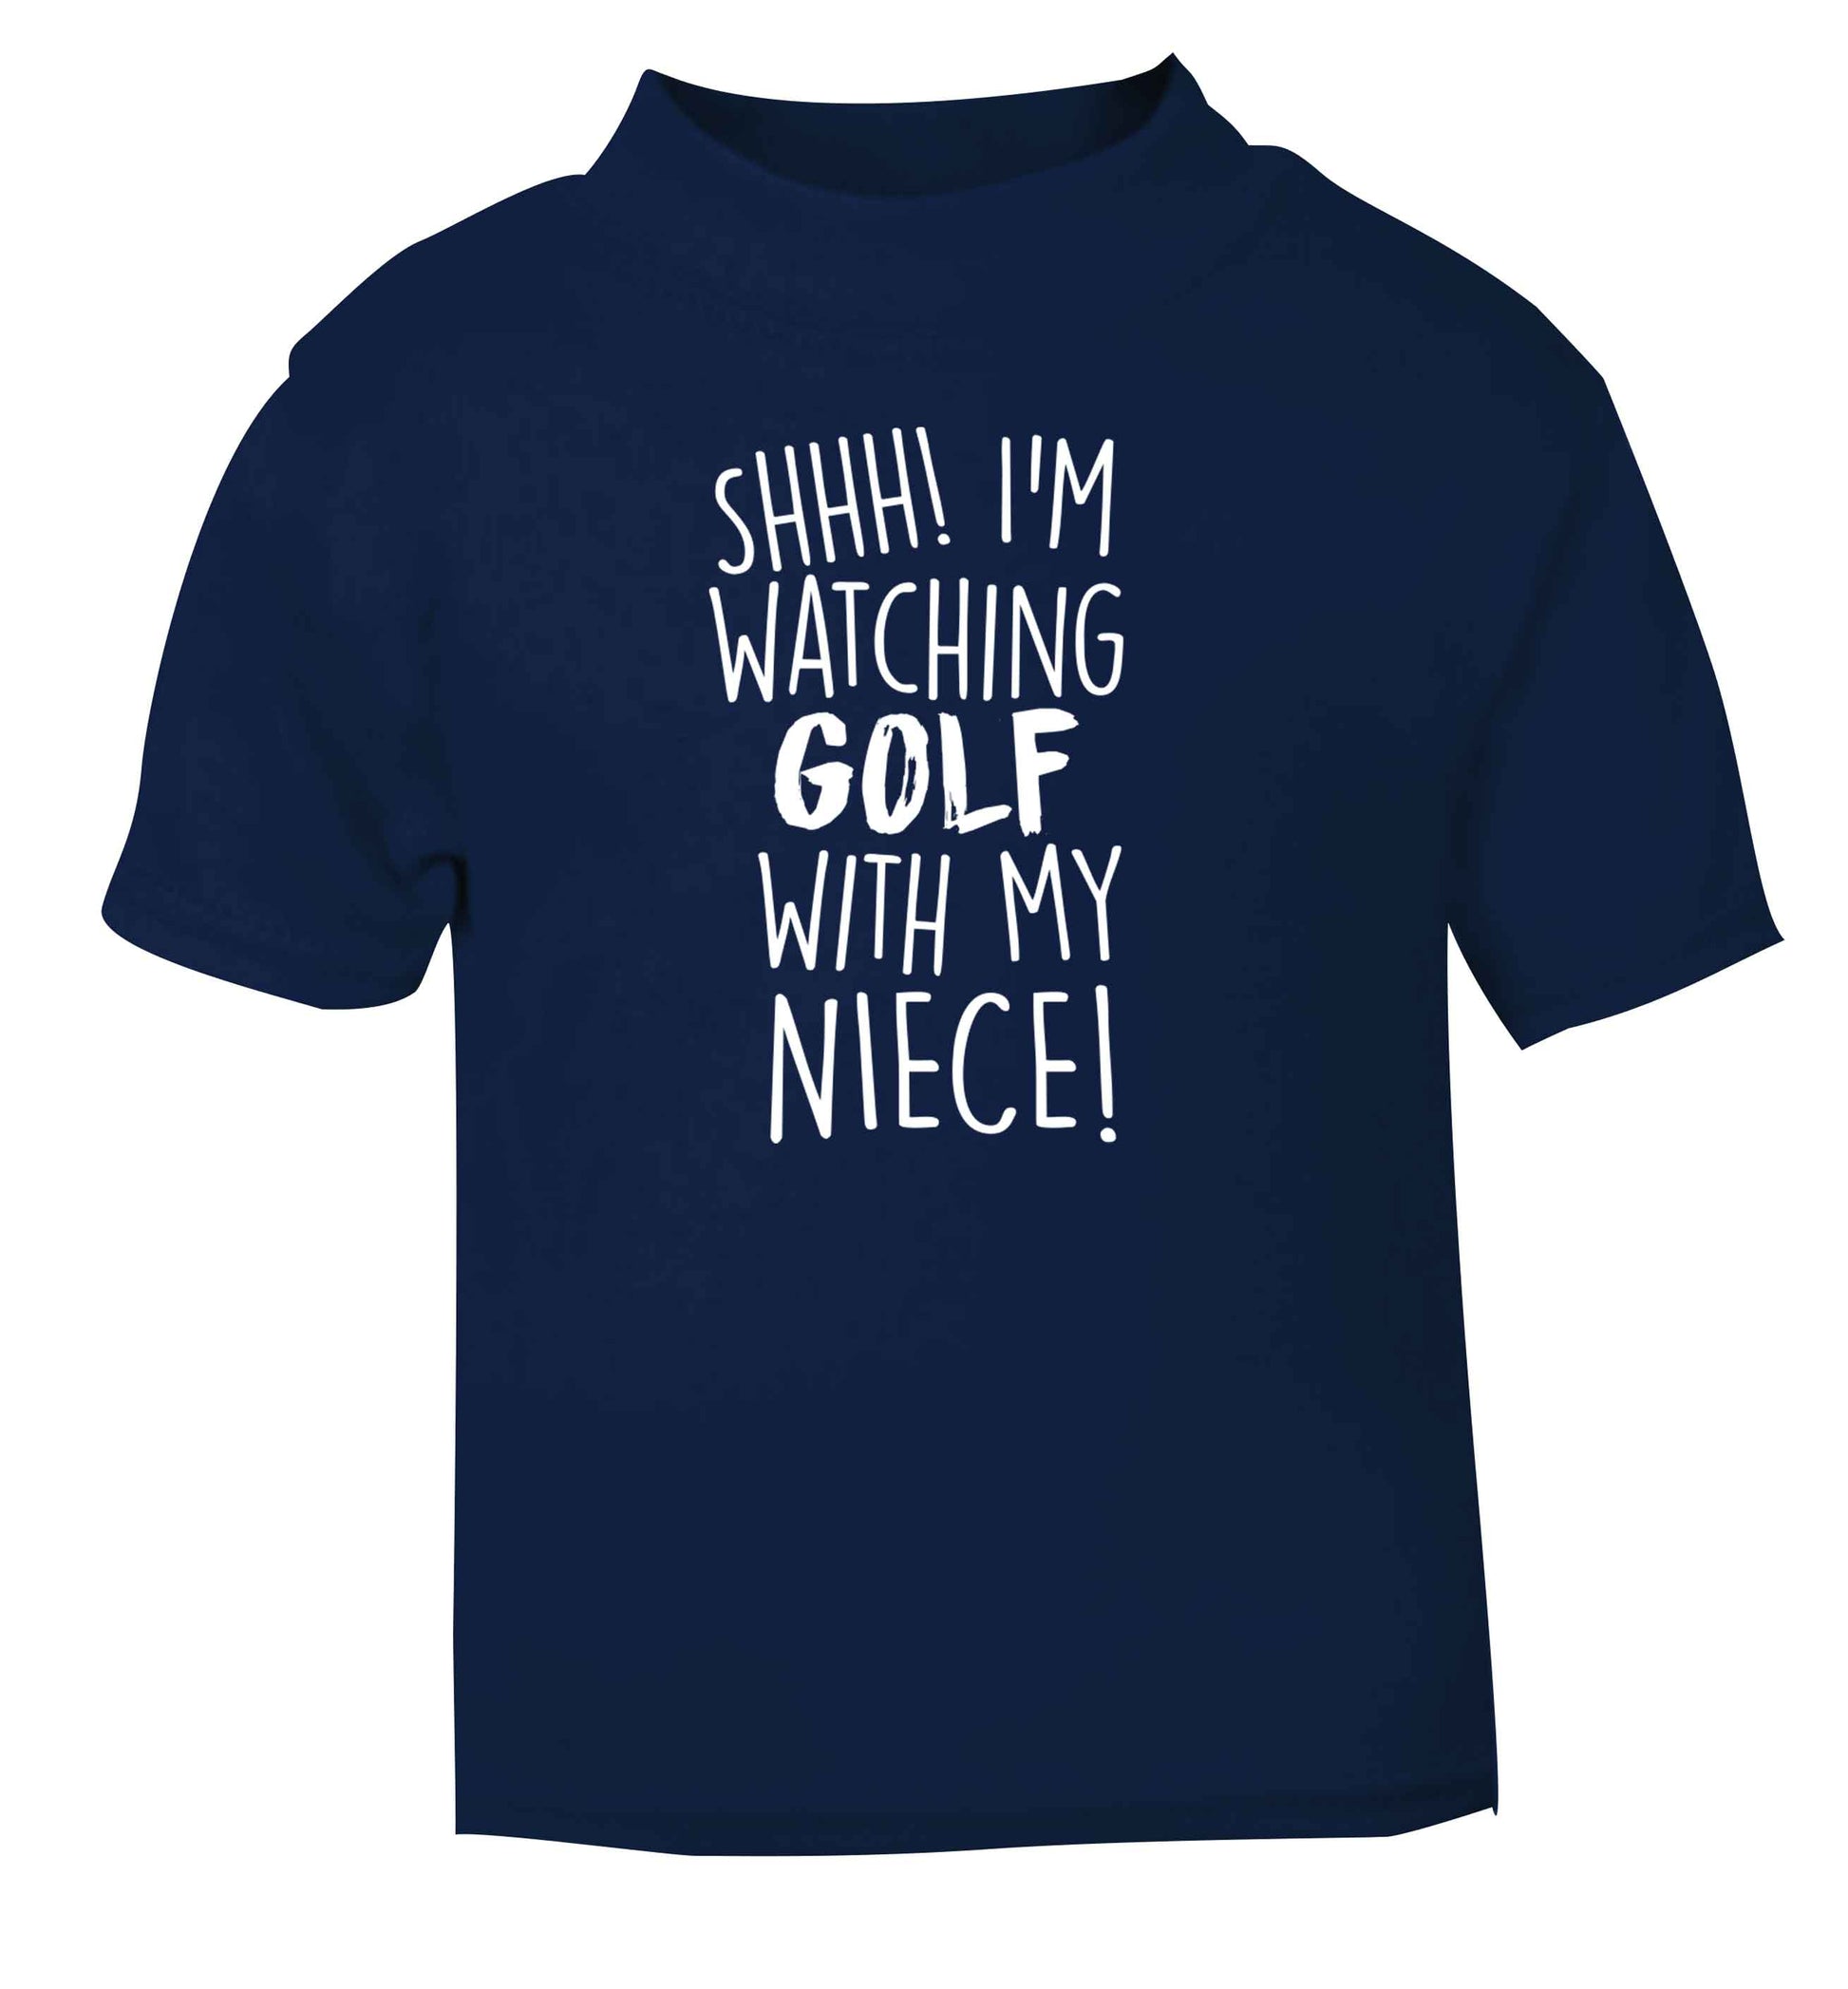 Shh I'm watching golf with my niece navy Baby Toddler Tshirt 2 Years